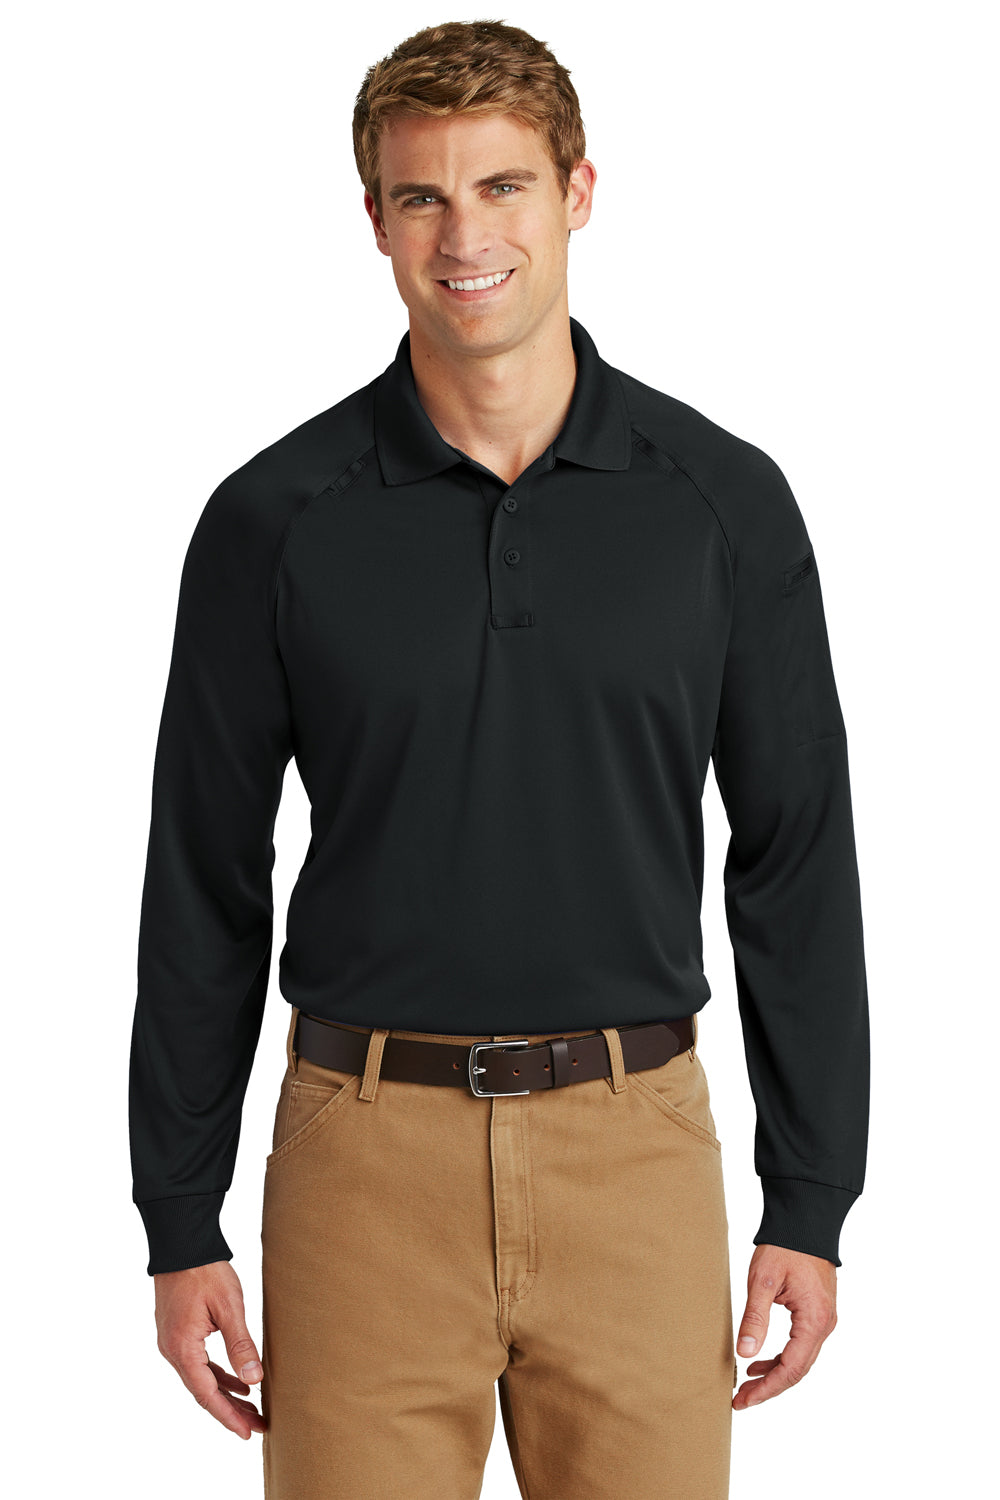 CornerStone CS410LS Mens Select Tactical Moisture Wicking Long Sleeve Polo Shirt Black Front